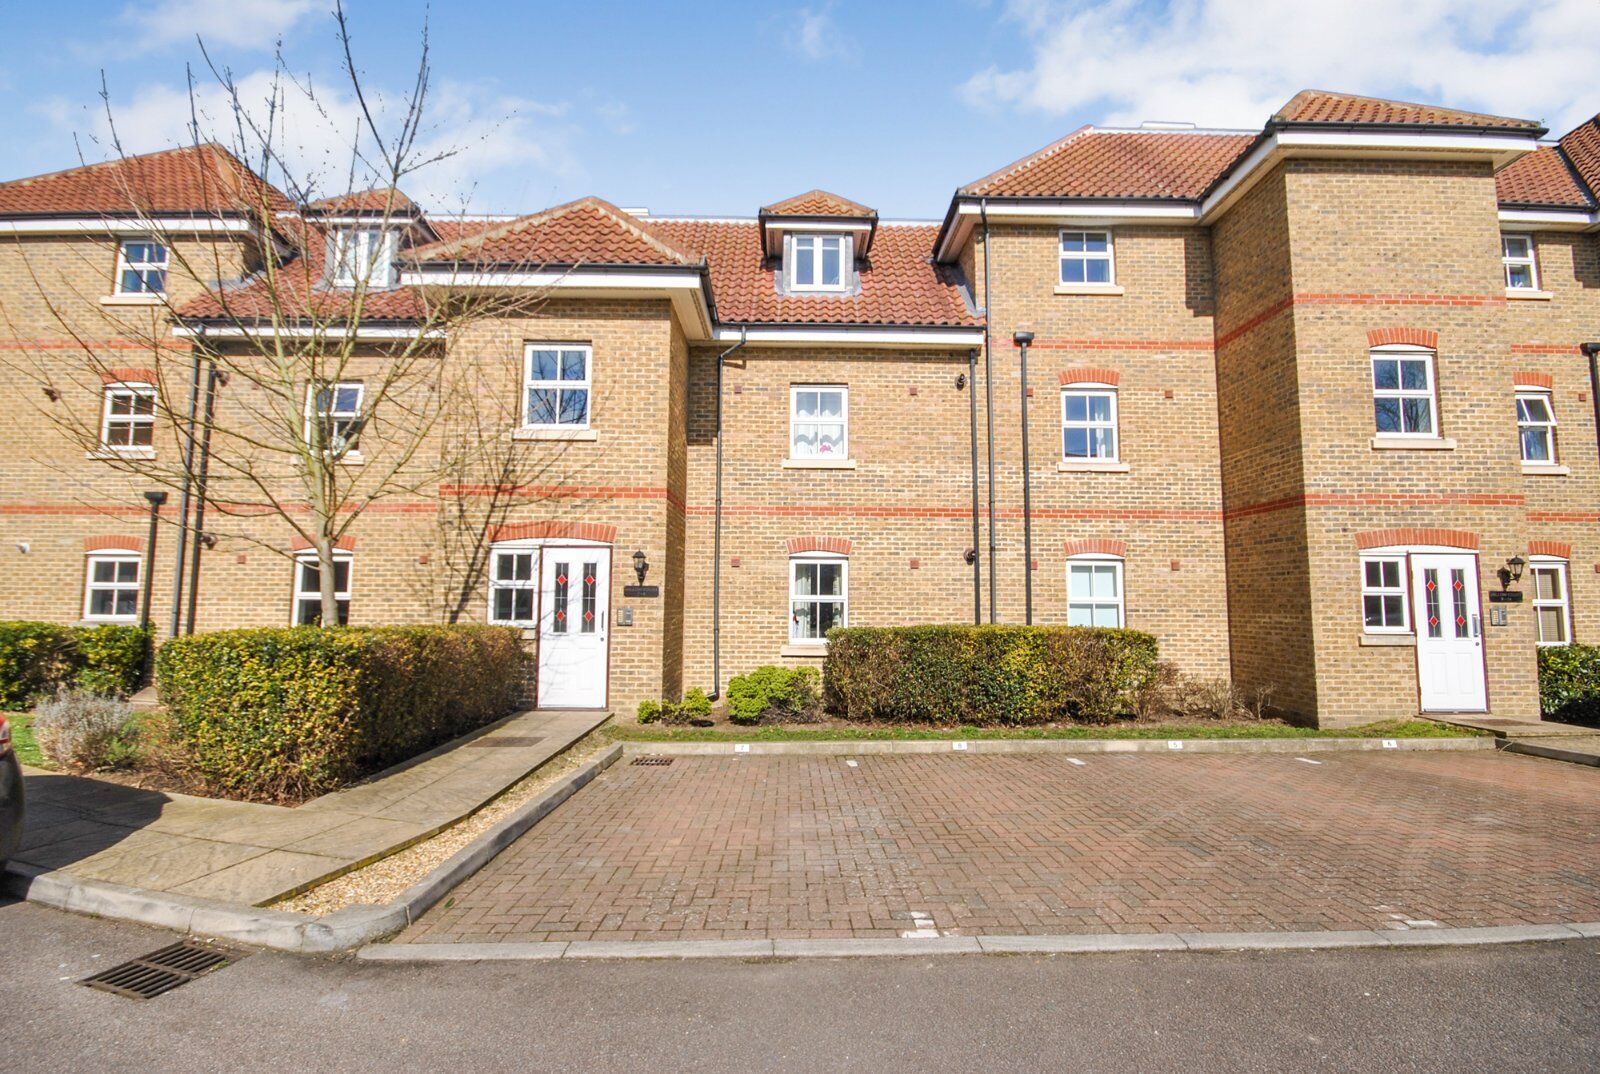 2 bedroom  flat for sale Willow Court, London Road, CM21, main image